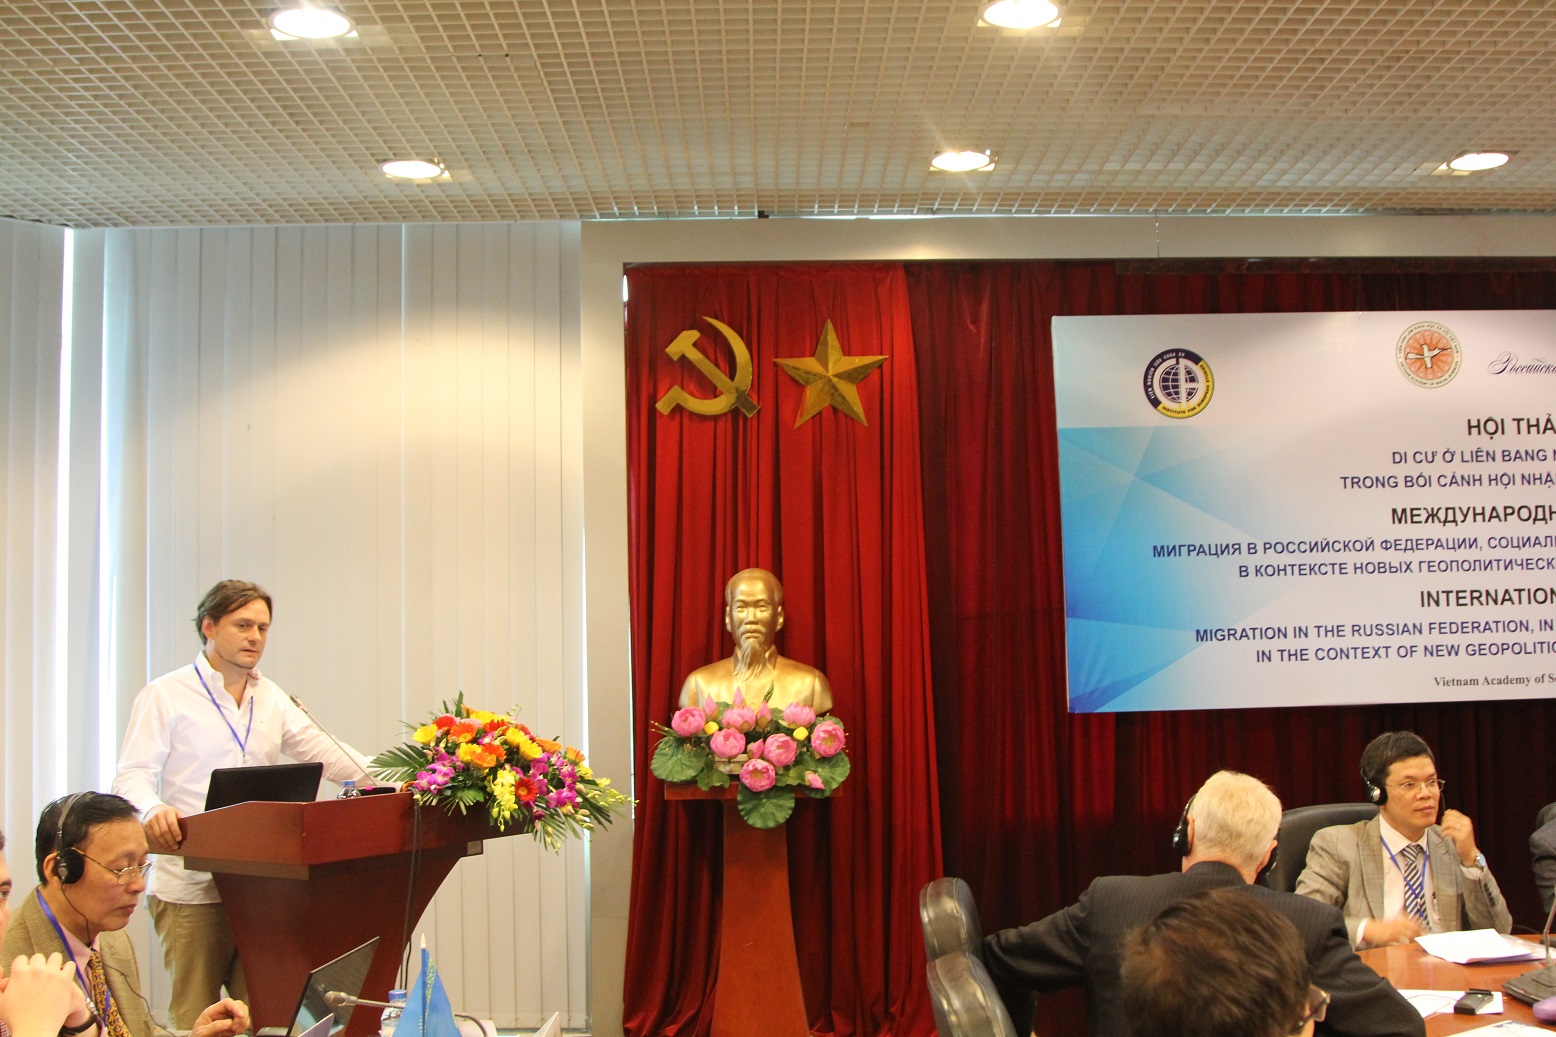 Prof. Sergei V. Ryazansev, Corresponding Member of the RAS,<br>Head of the Center for Social Demography of the Institute<br>of Socio-Political Research of the RAS made a welcoming speech